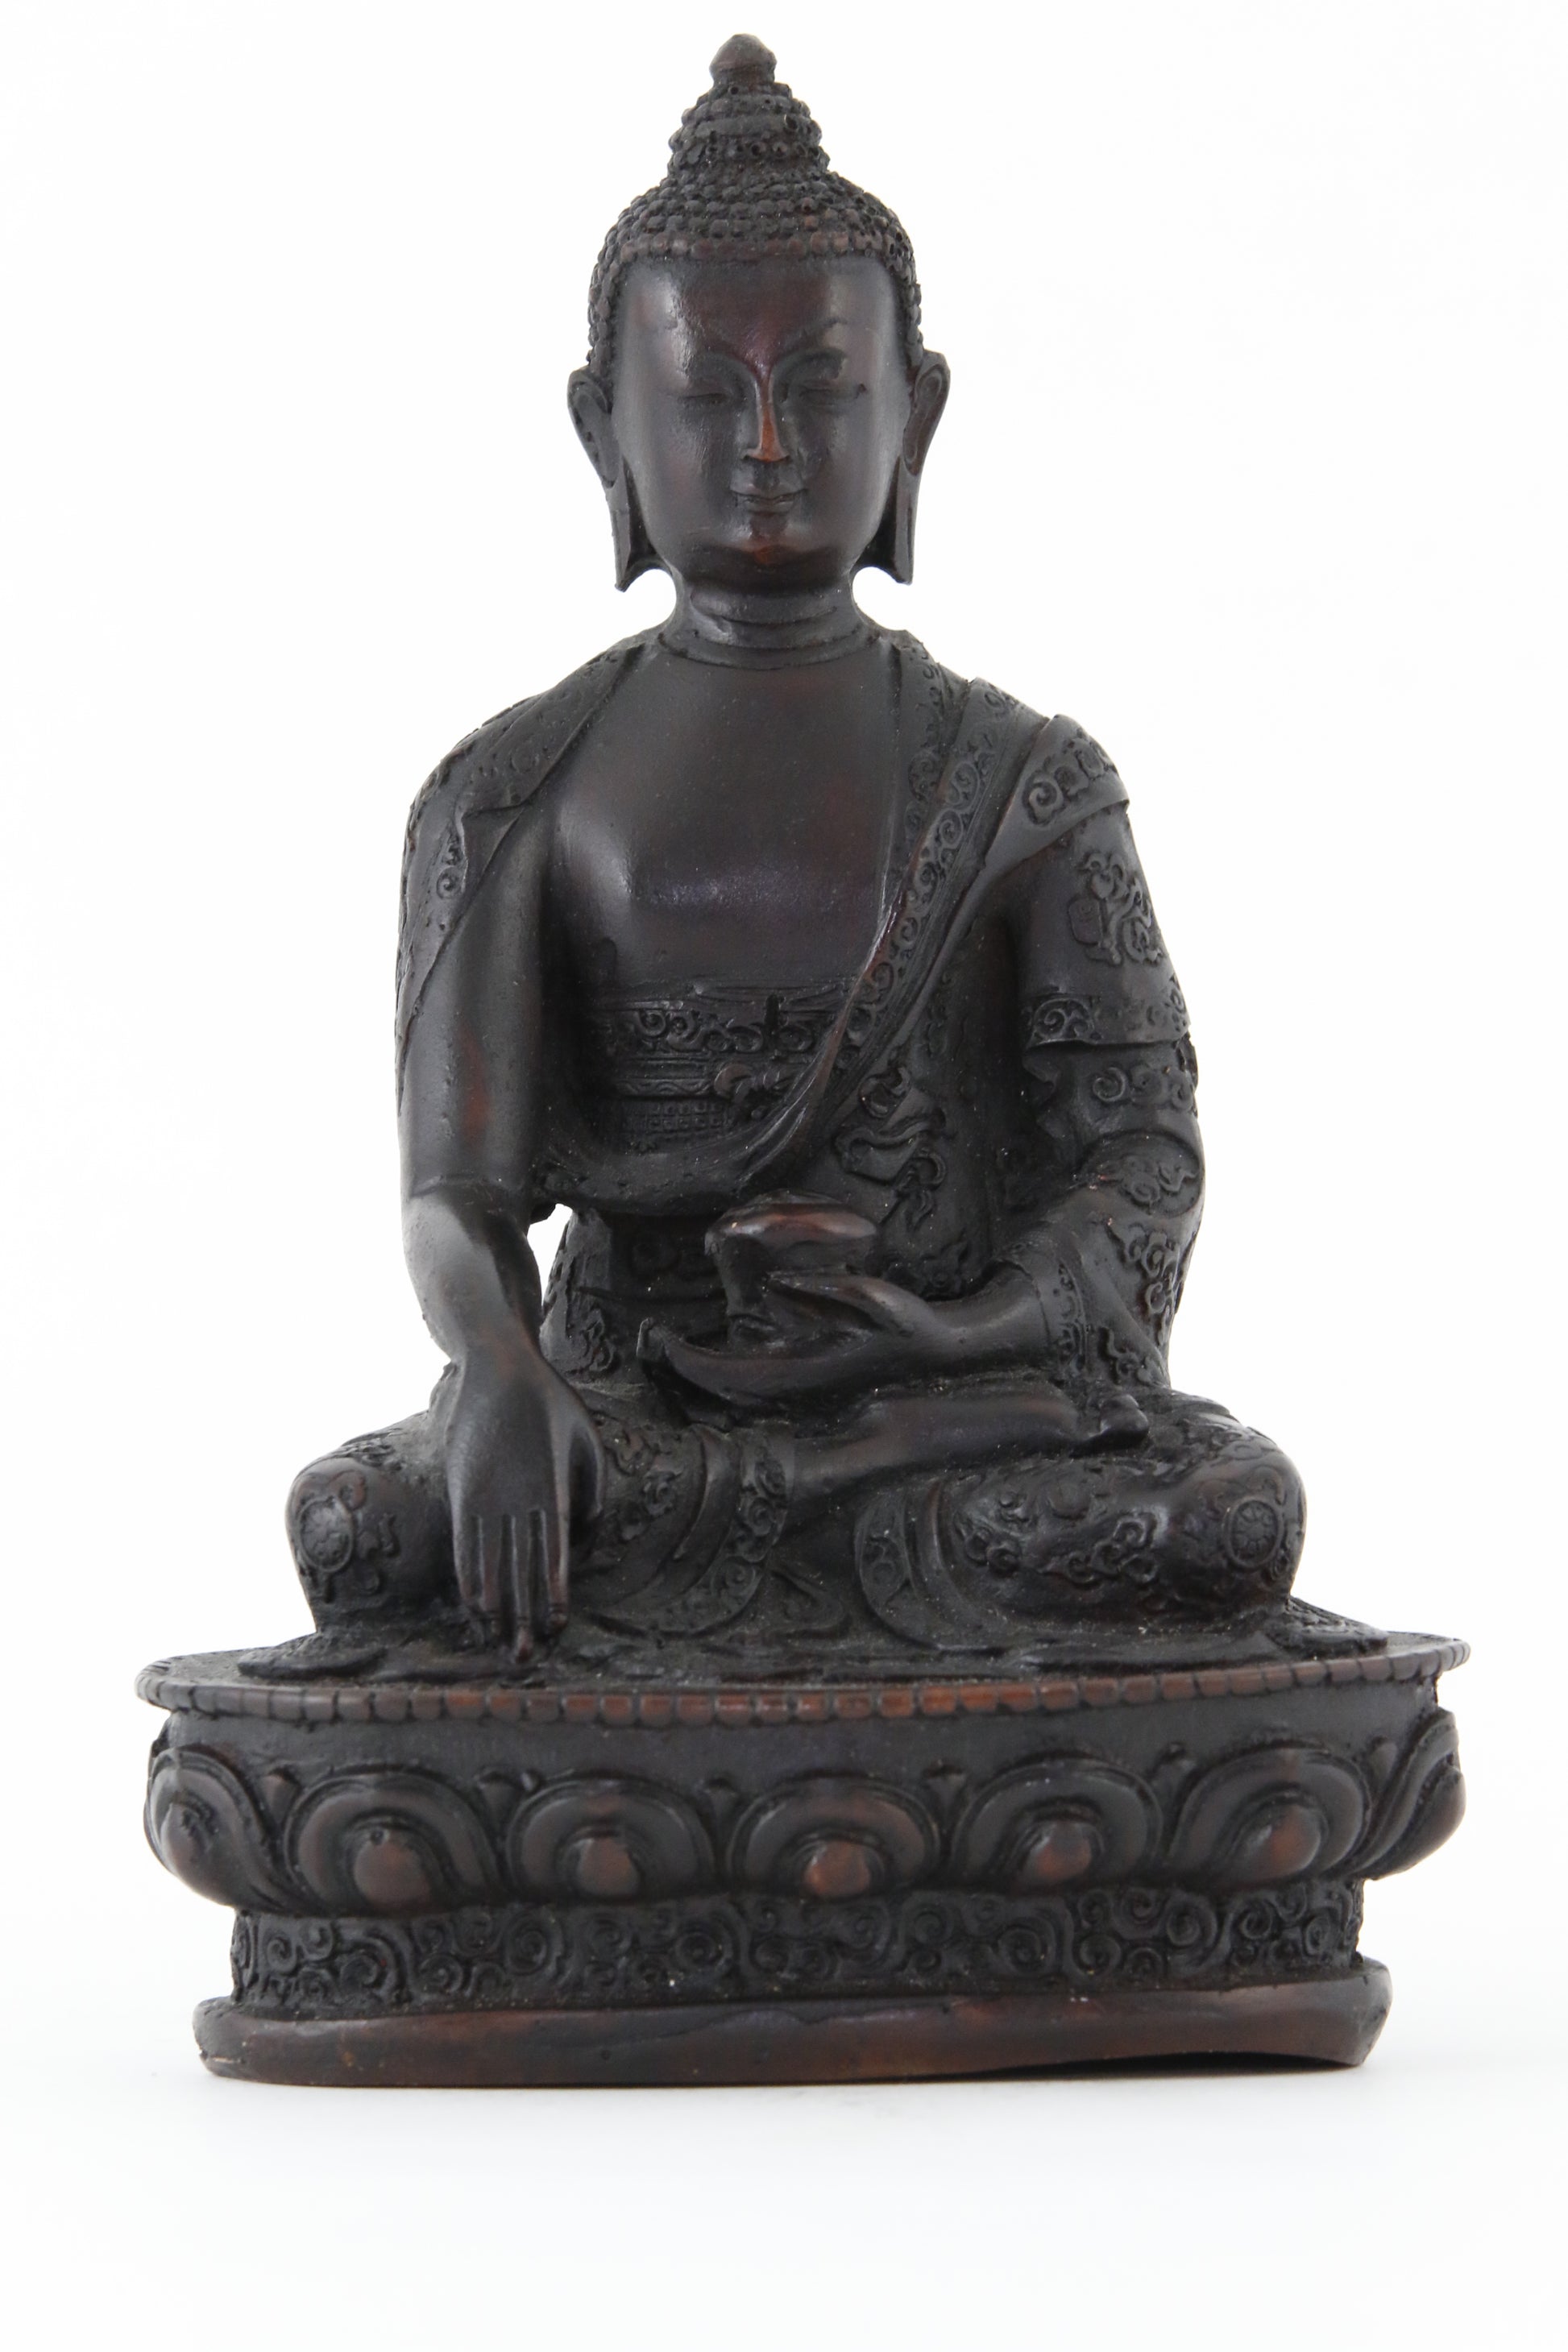 EARTH TOUCHING BUDDHA STATUE DARK LARGE FRONT VIEW